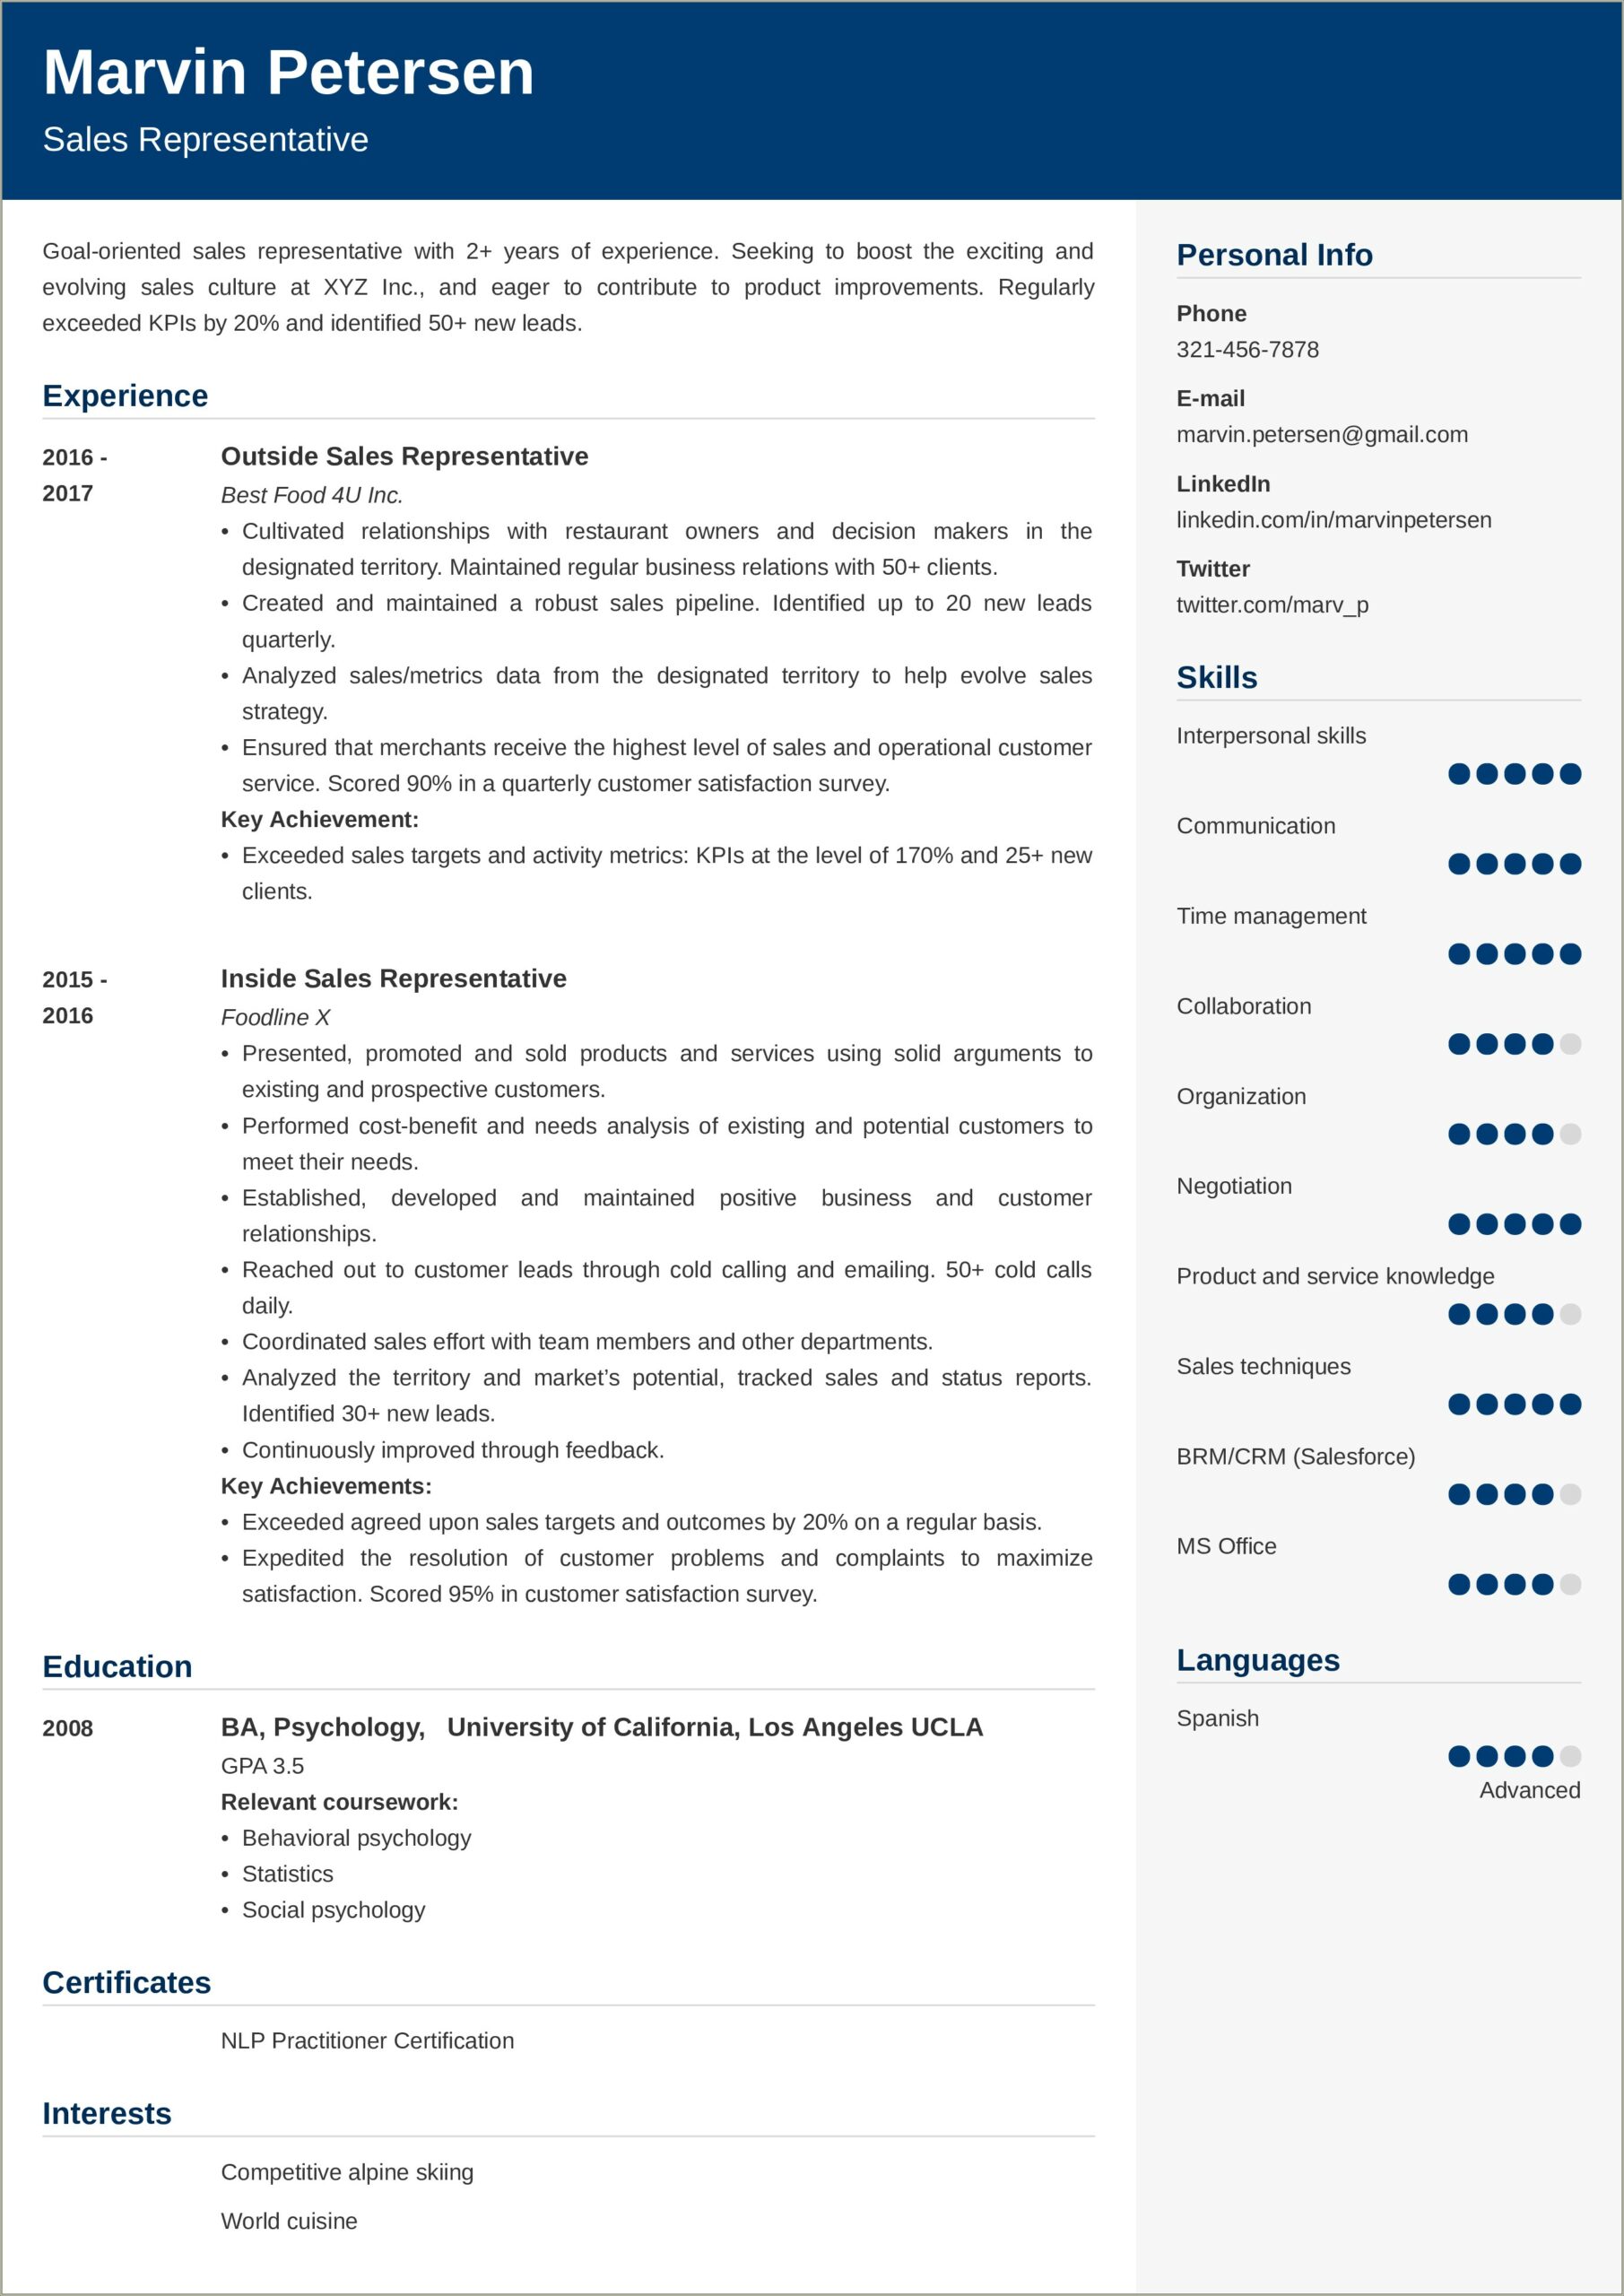 Commercial Insurance Claims Trainee Resume Skill